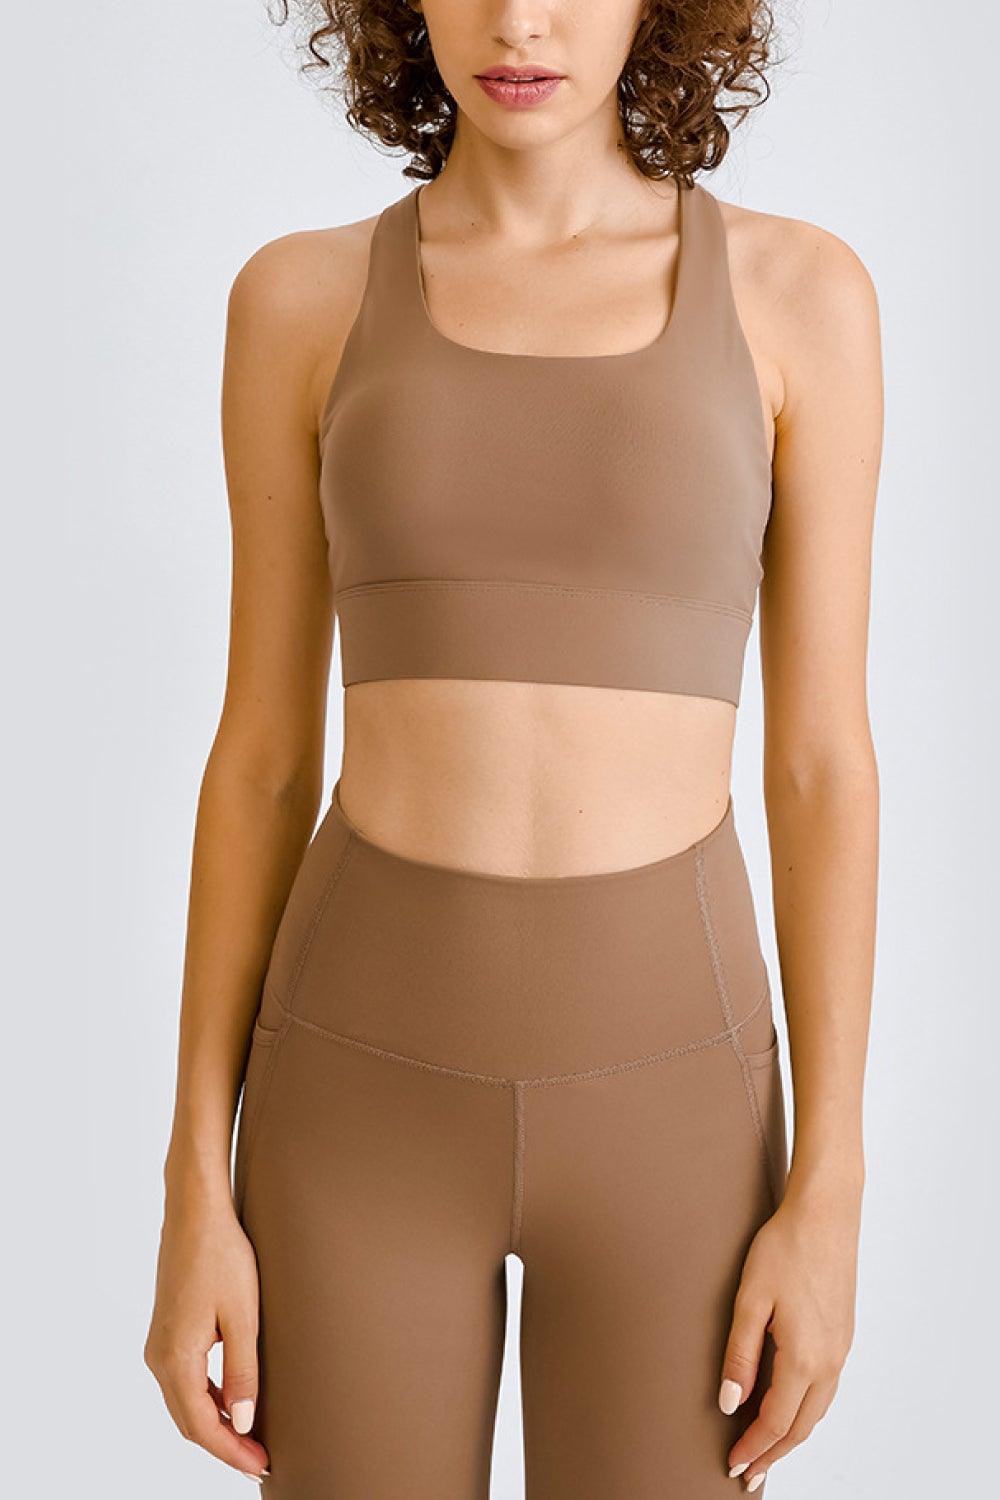 Cross Back Yoga Crop Top - Fitted Yoga Bra - Personal Hour for Yoga and Meditations 